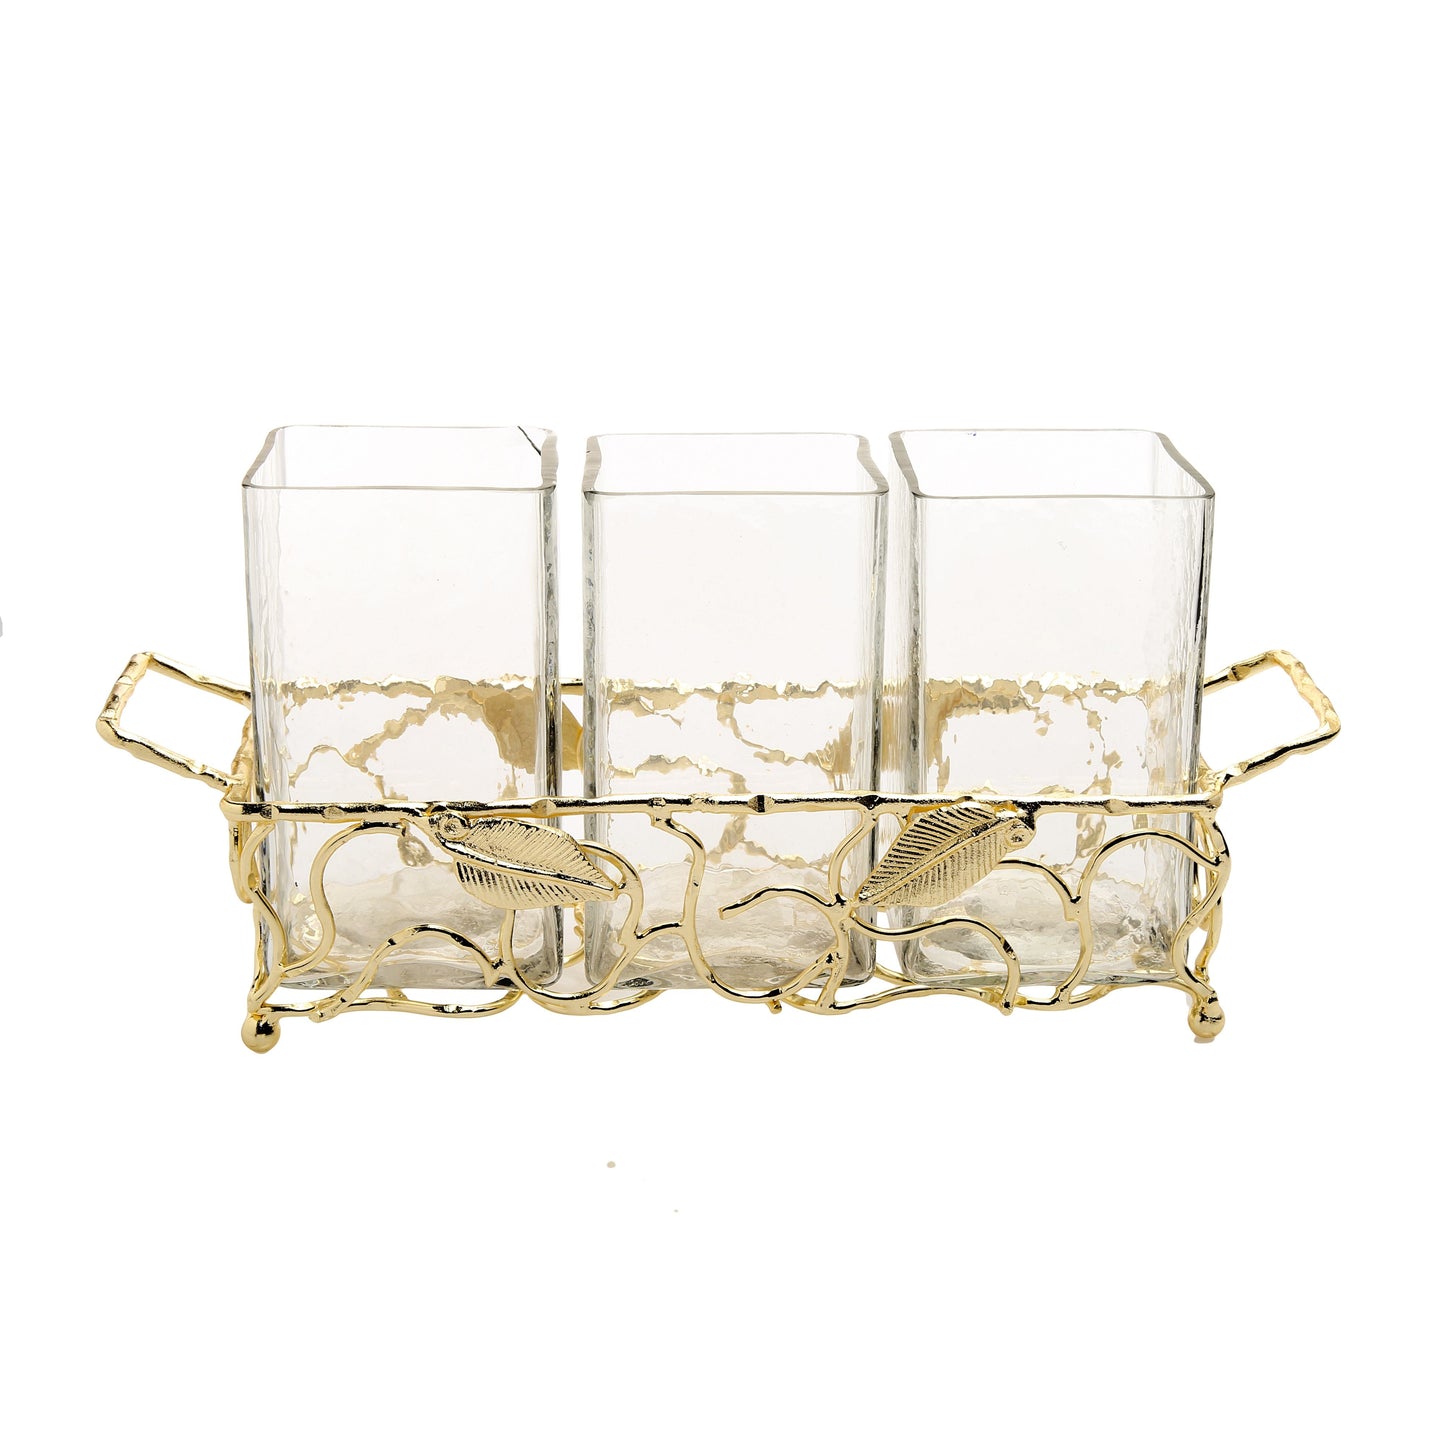 Classic Touch Gold Leaf Cutlery Holder With Hammered Glass Inserts, 6"x 4"x 12"